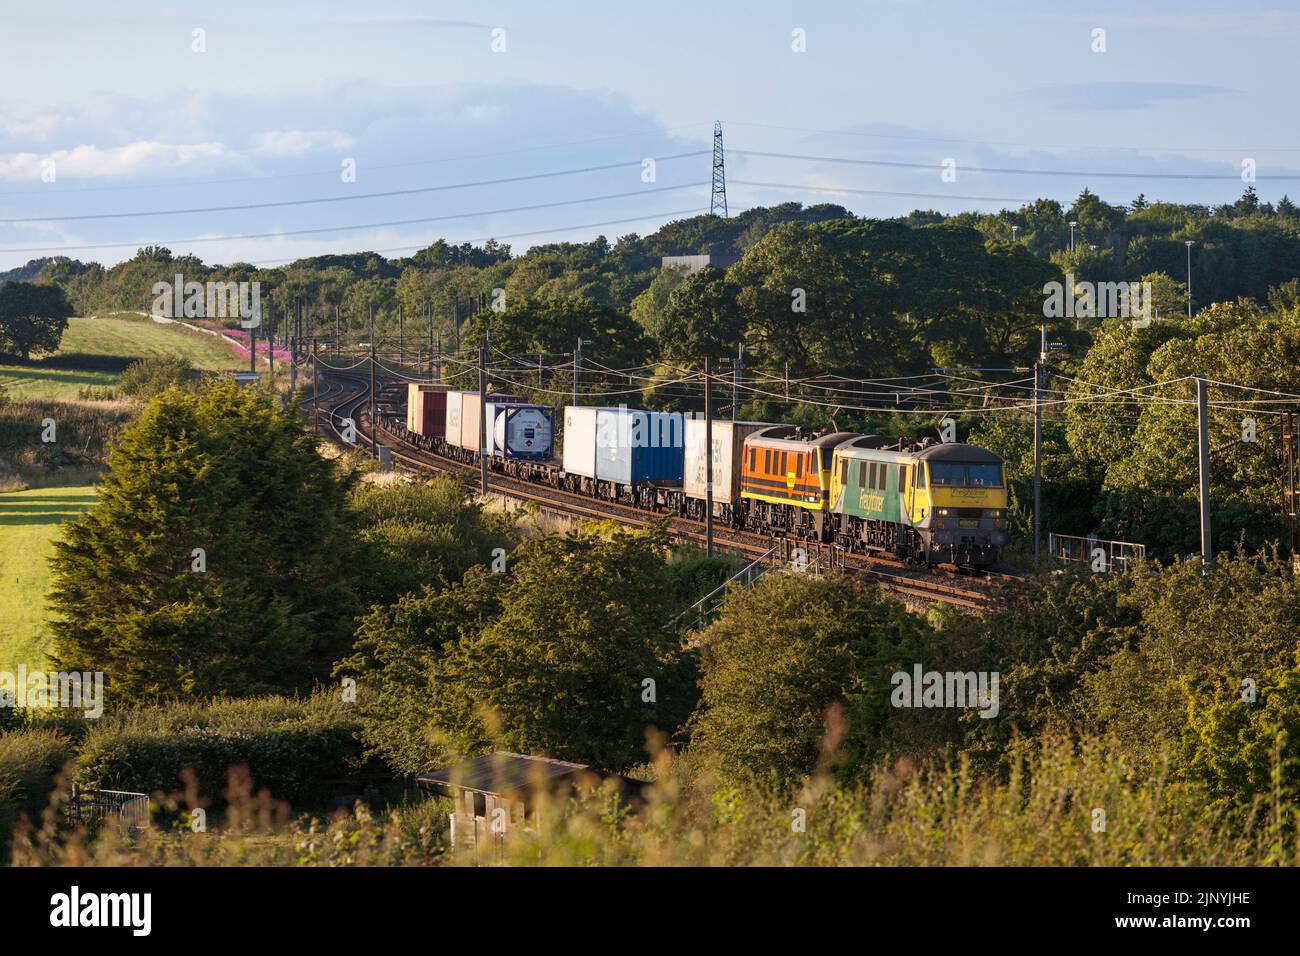 13/07/2022 Oubeck (south of Lancaster) 90045 + 90004 4M80 1633 Coatbridge F.L.T. to Crewe Bas Hall S.S.M. Stock Photo